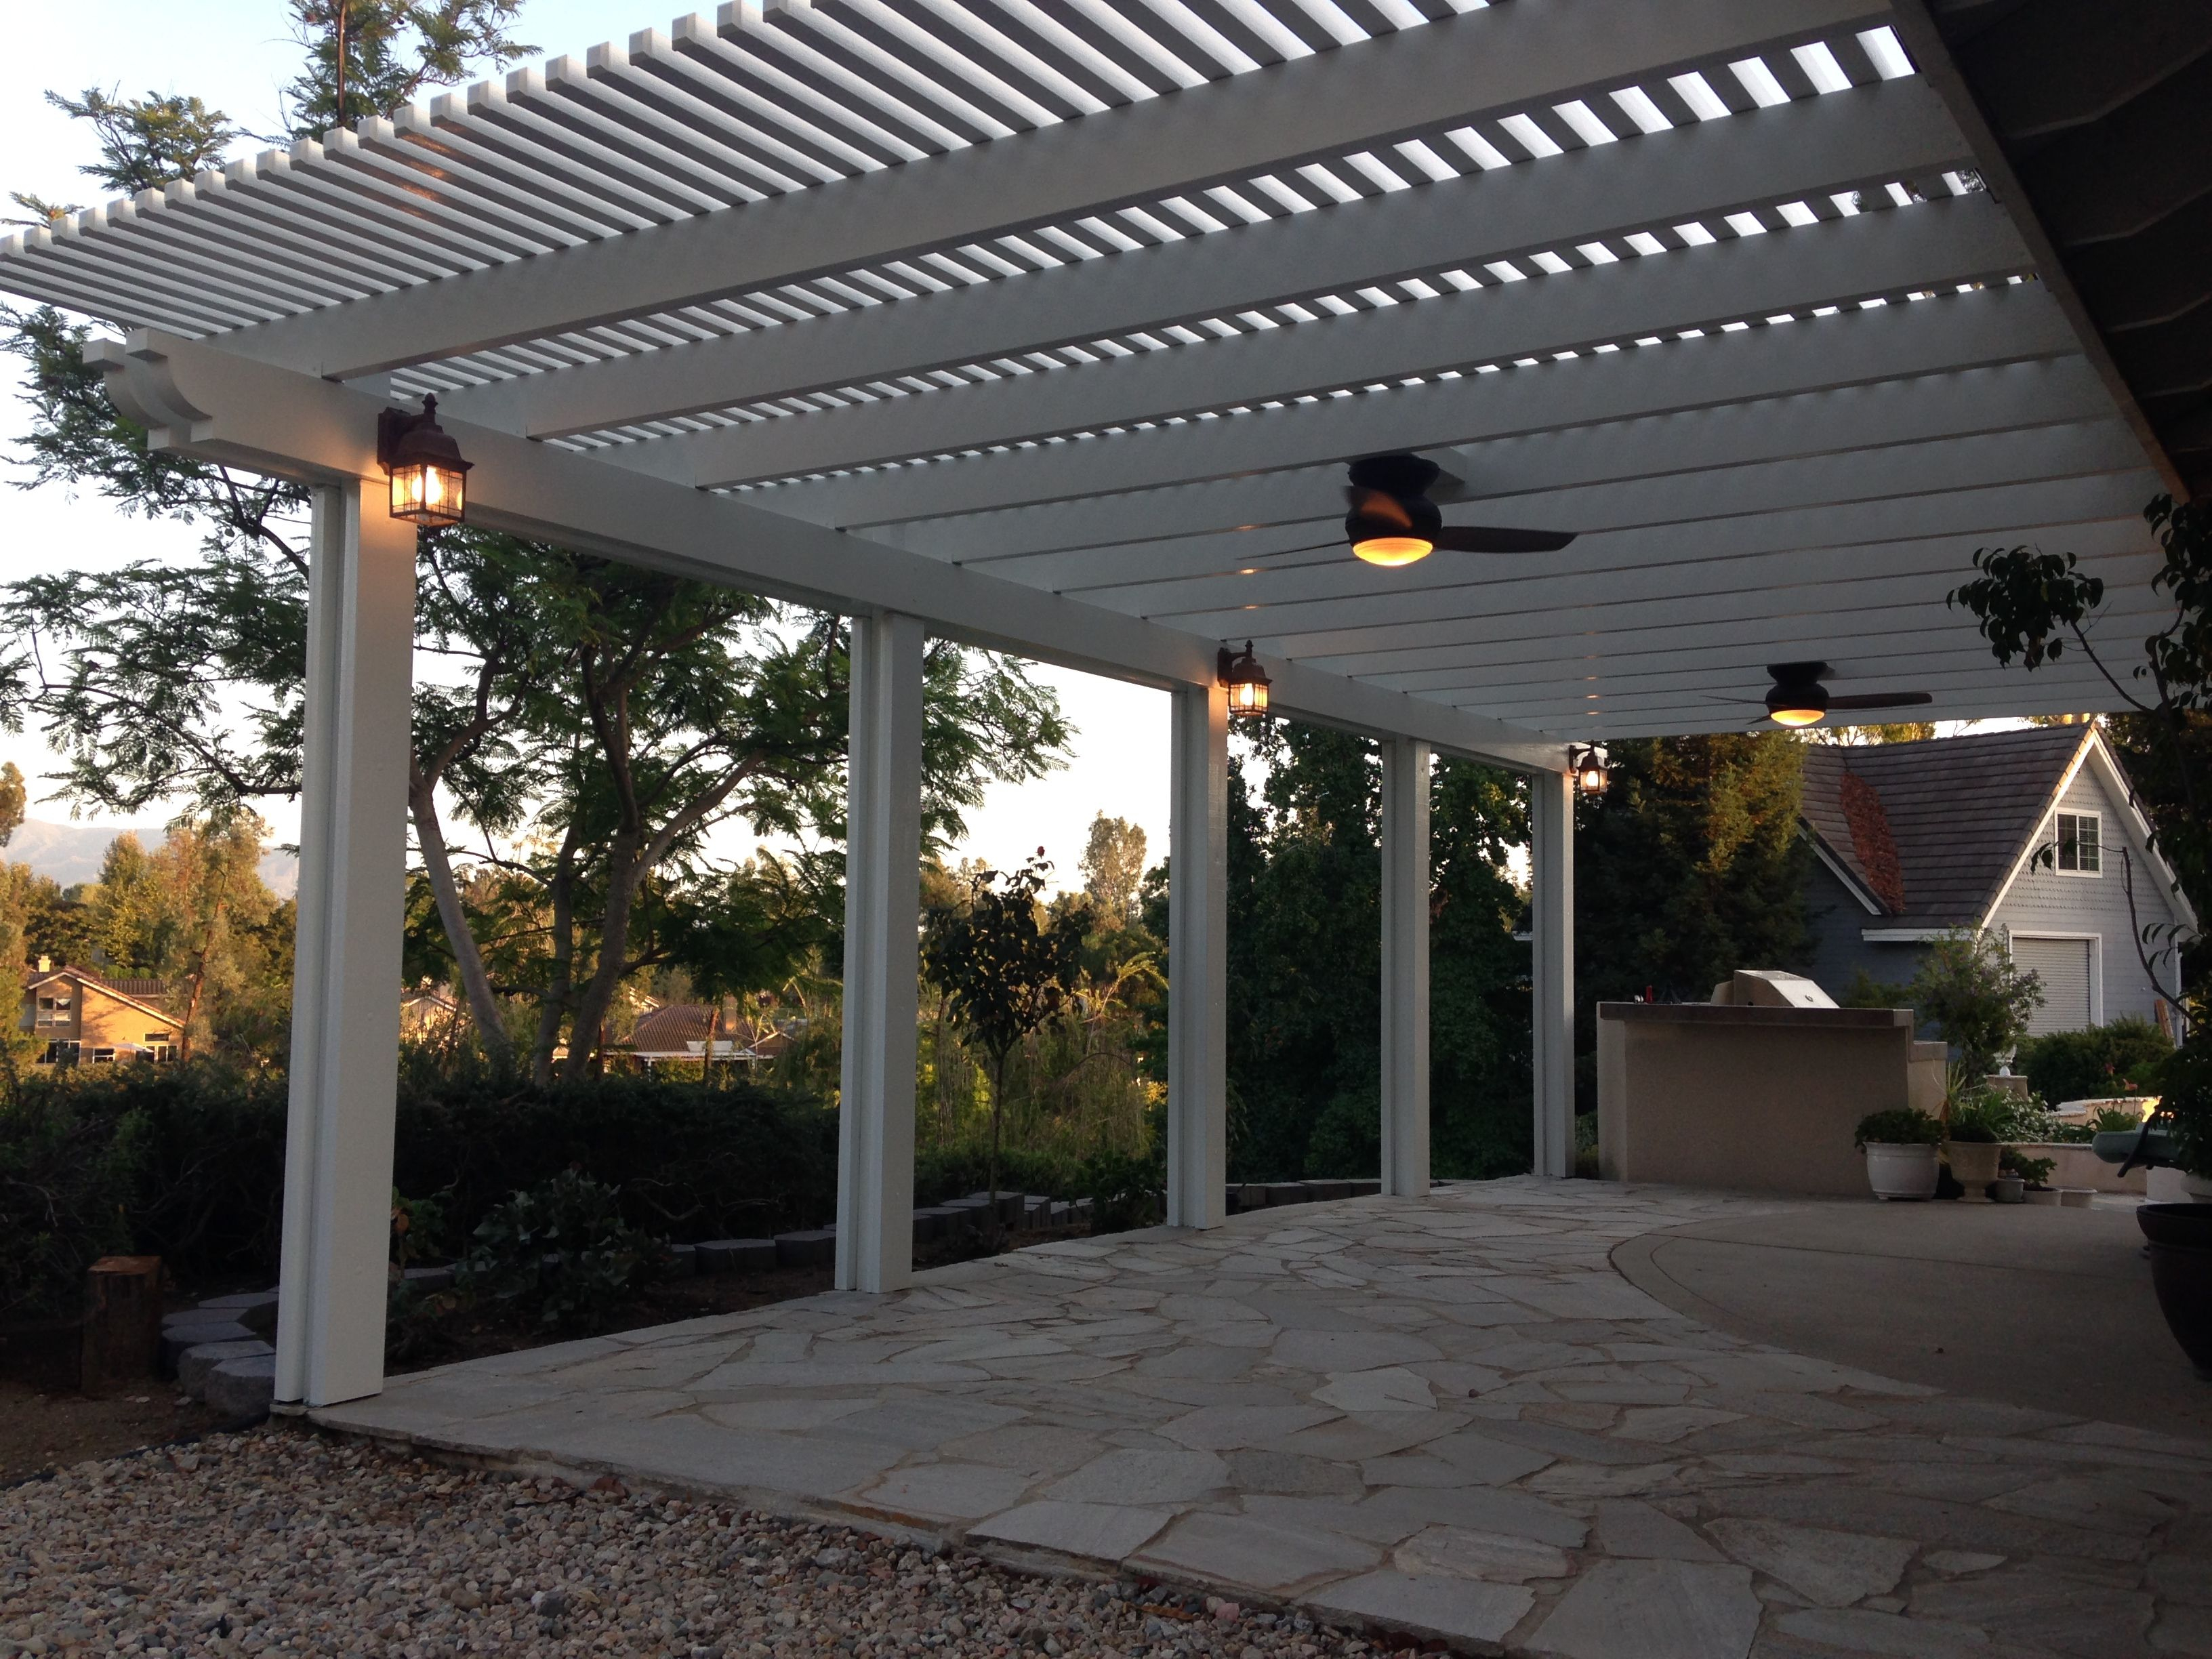 Lattice Patio With Electrical Upgrades Fans Lights And in dimensions 3264 X 2448